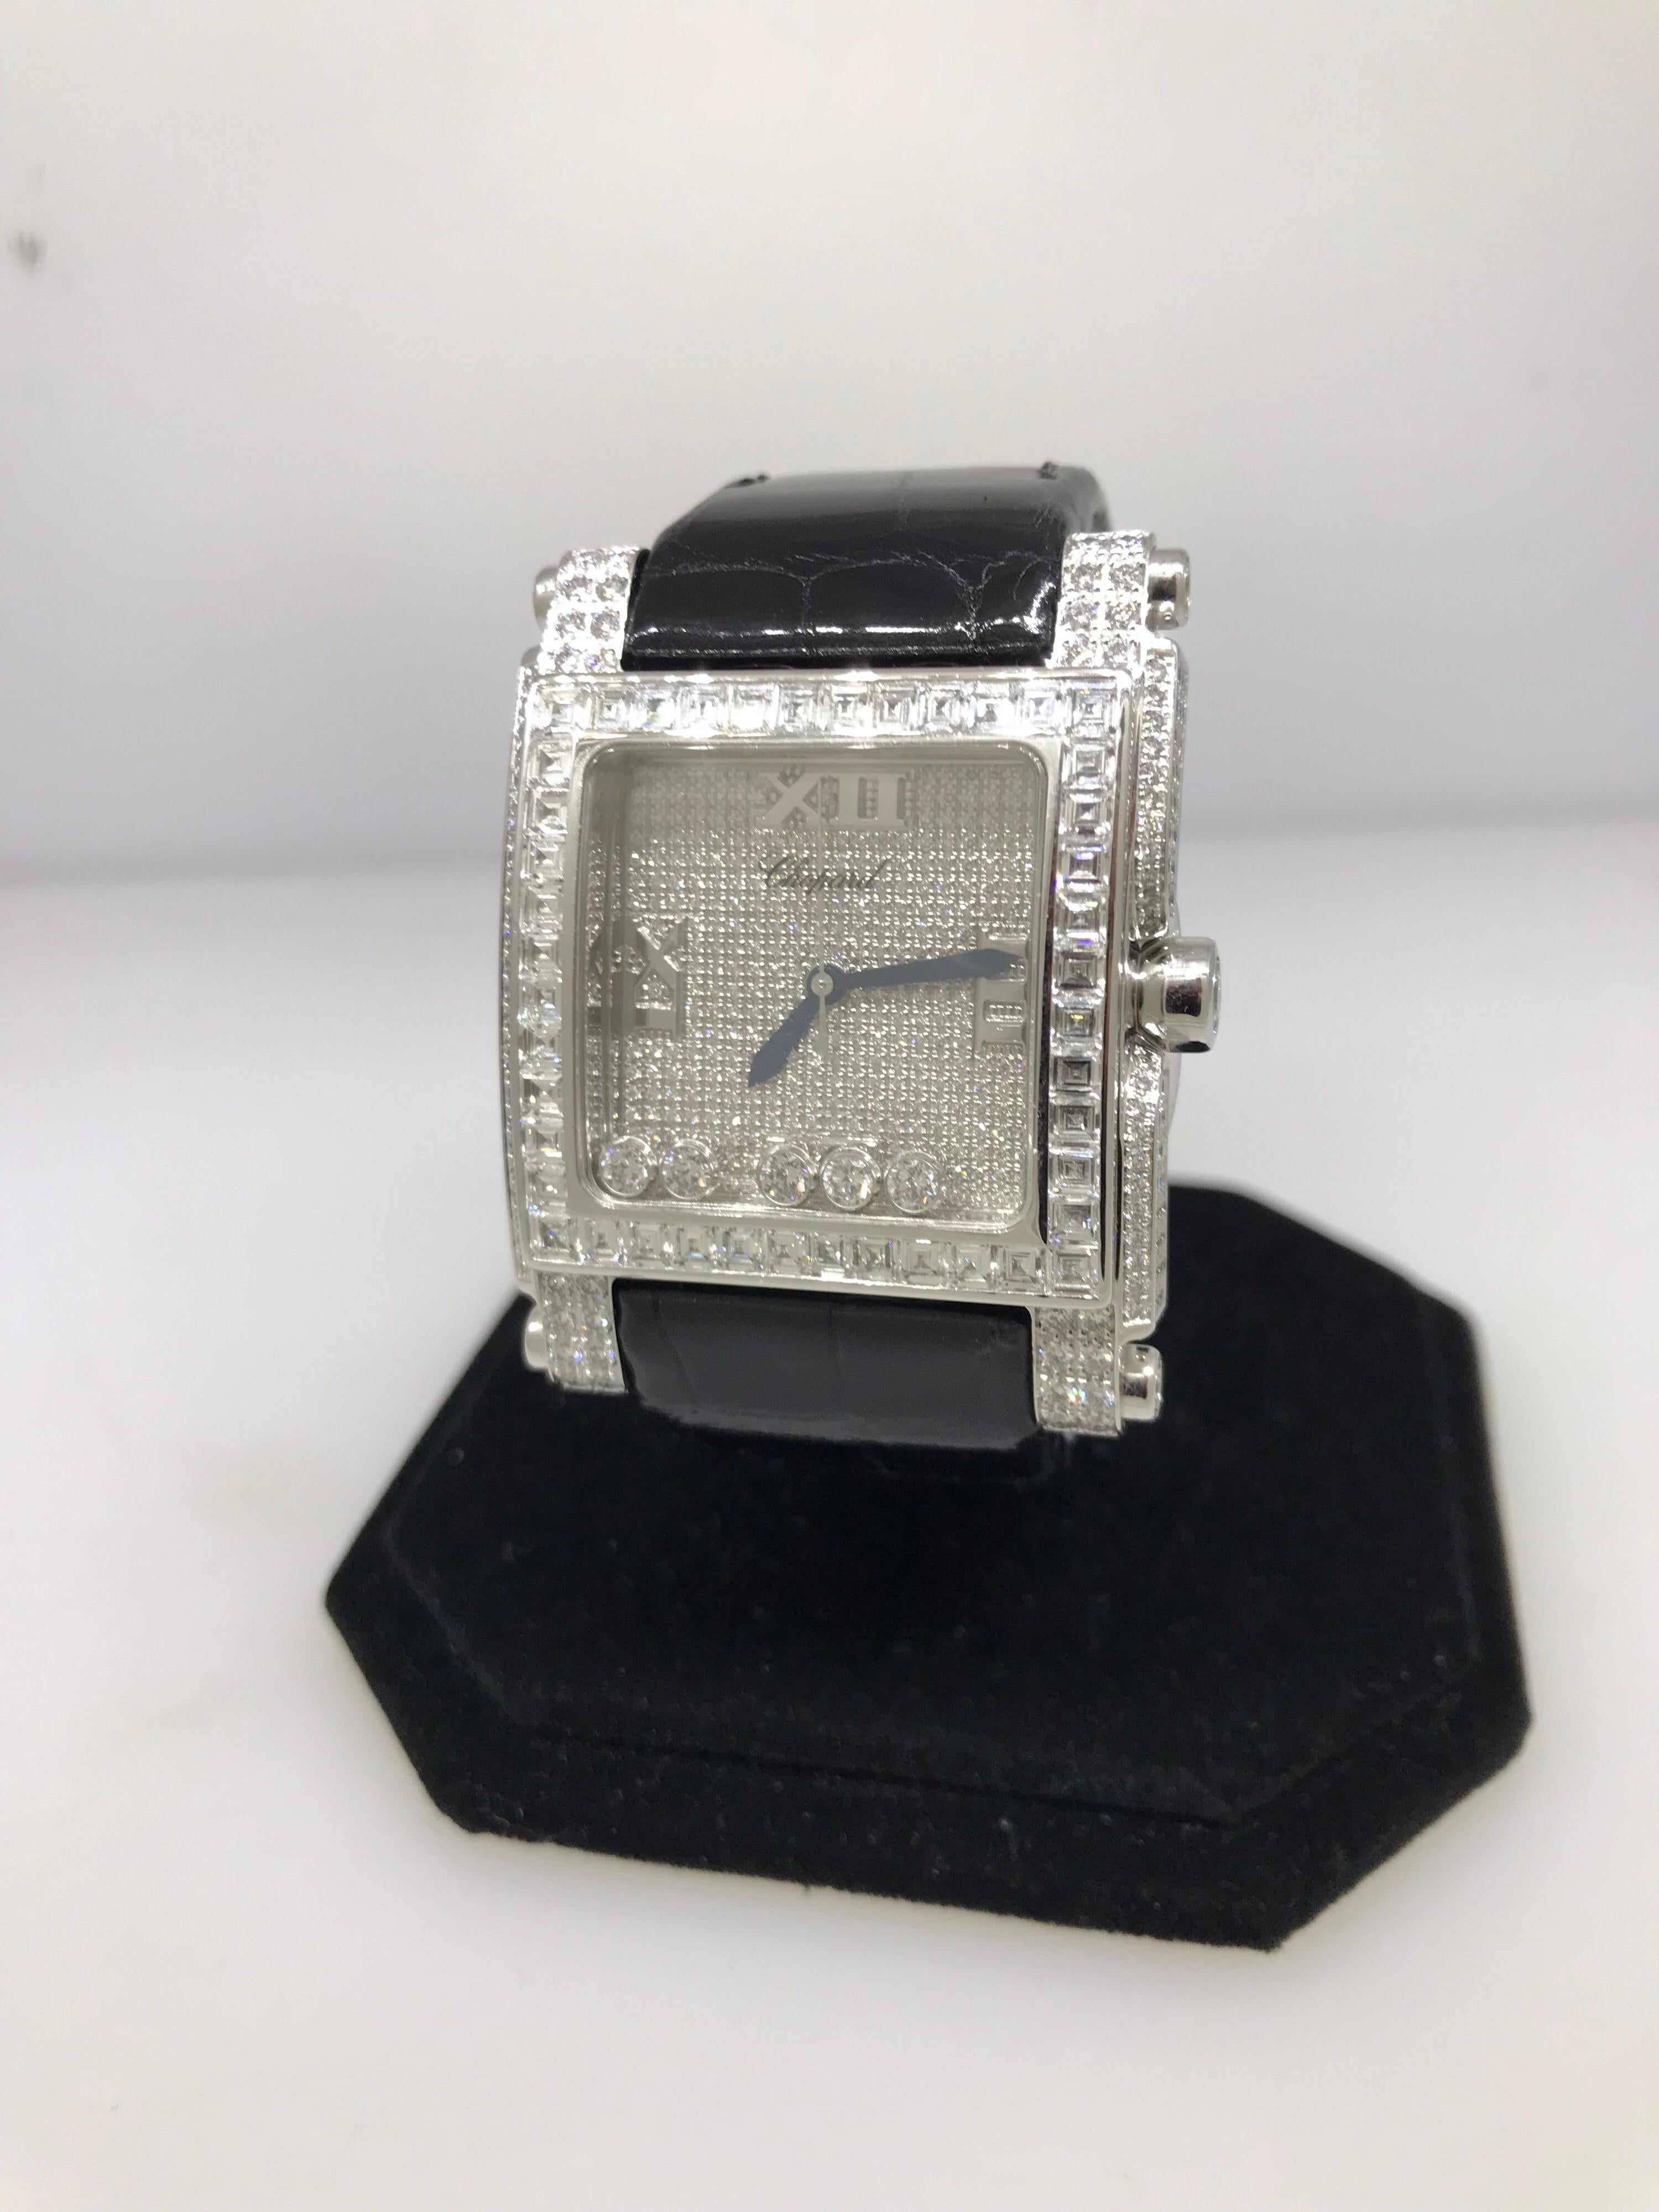 Chopard Happy Sport Square Ladies Watch

Model Number: 28/3577-1001

100% Authentic

Brand New

Comes with original Chopard Box, Certificate of Authenticity and Warranty, and Instruction Manual

18 Karat White Gold Case & Buckle (134.7gr)

Bezel Set